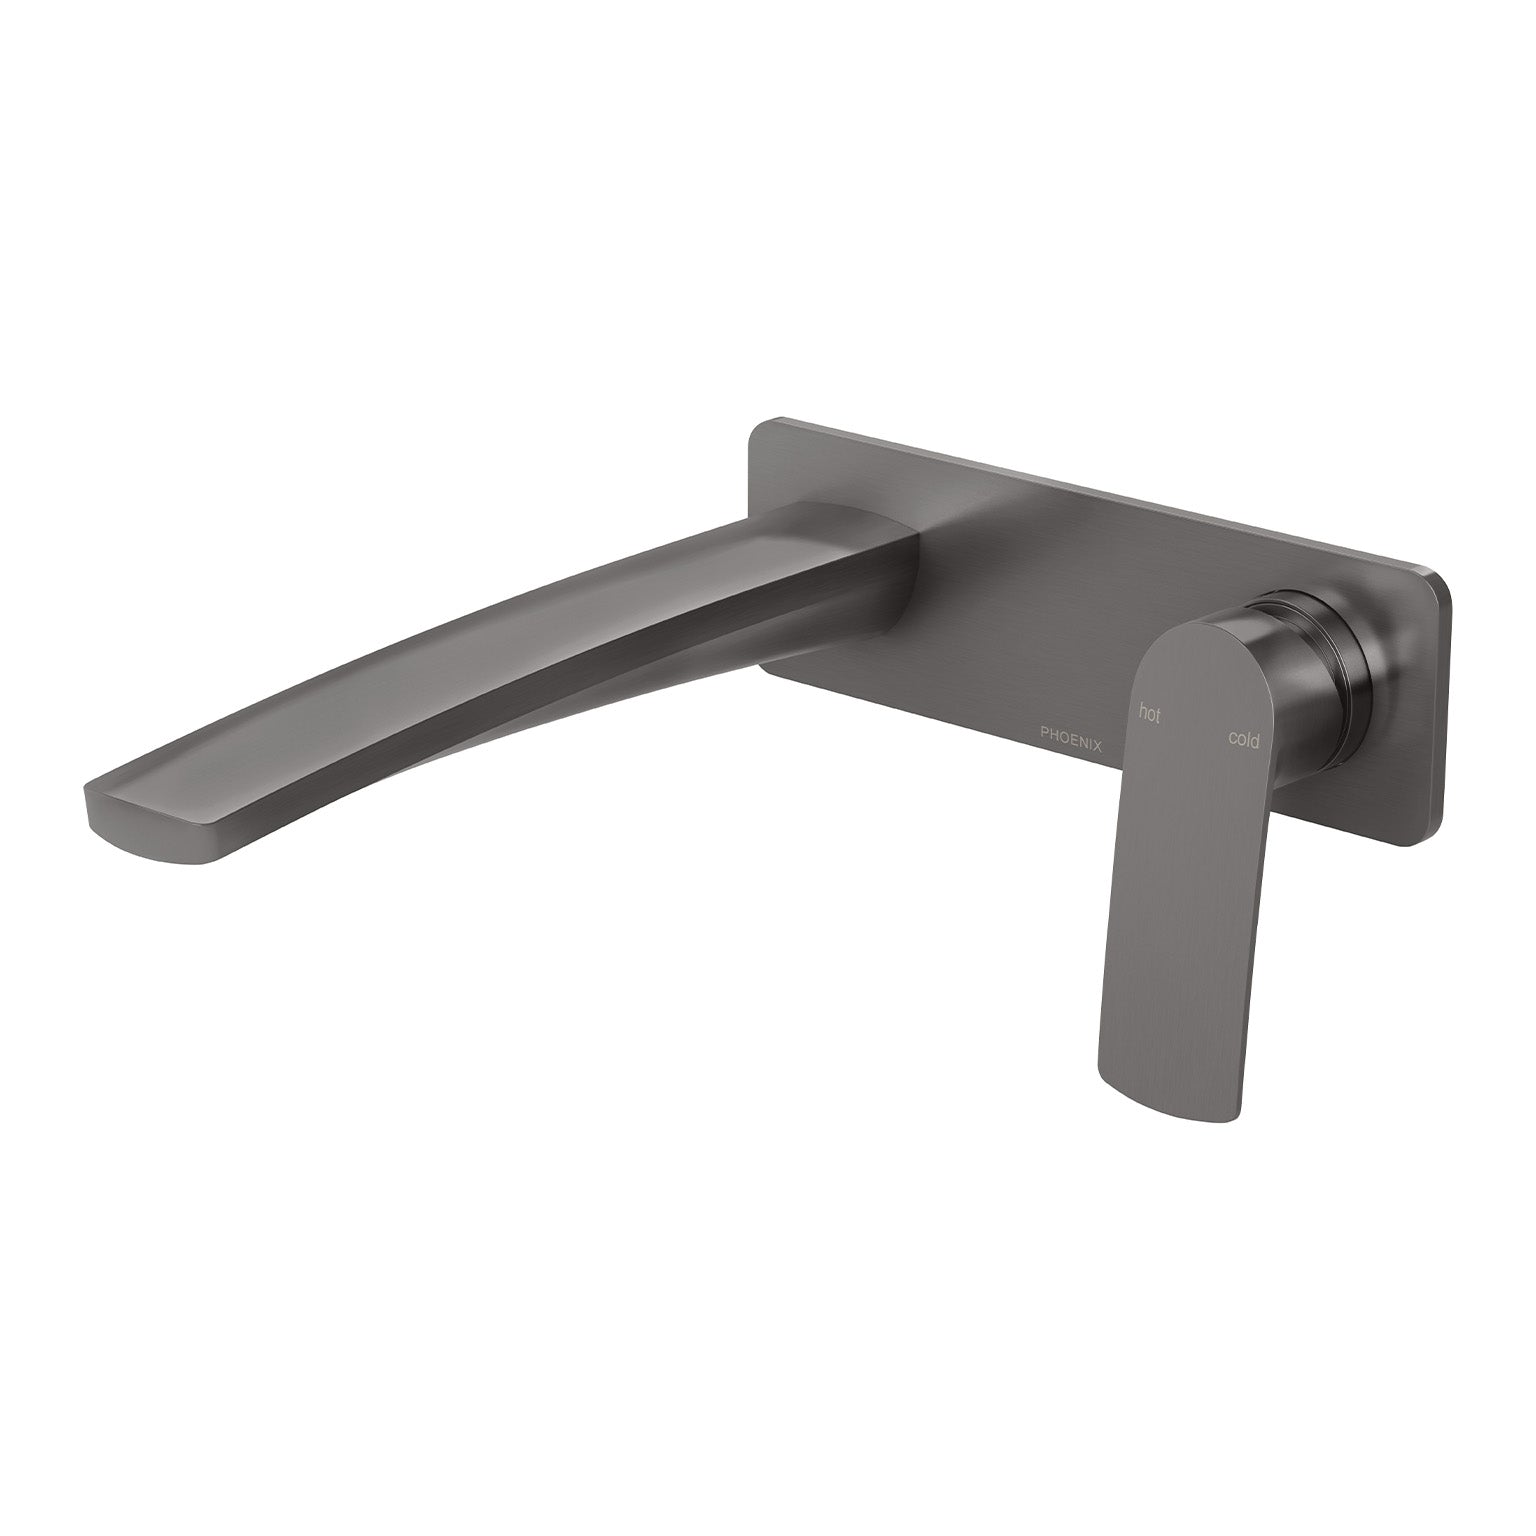 PHOENIX MEKKO SWITCHMIX WALL BASIN / BATH MIXER SET FIT-OFF AND ROUGH-IN KIT 200MM BRUSHED CARBON